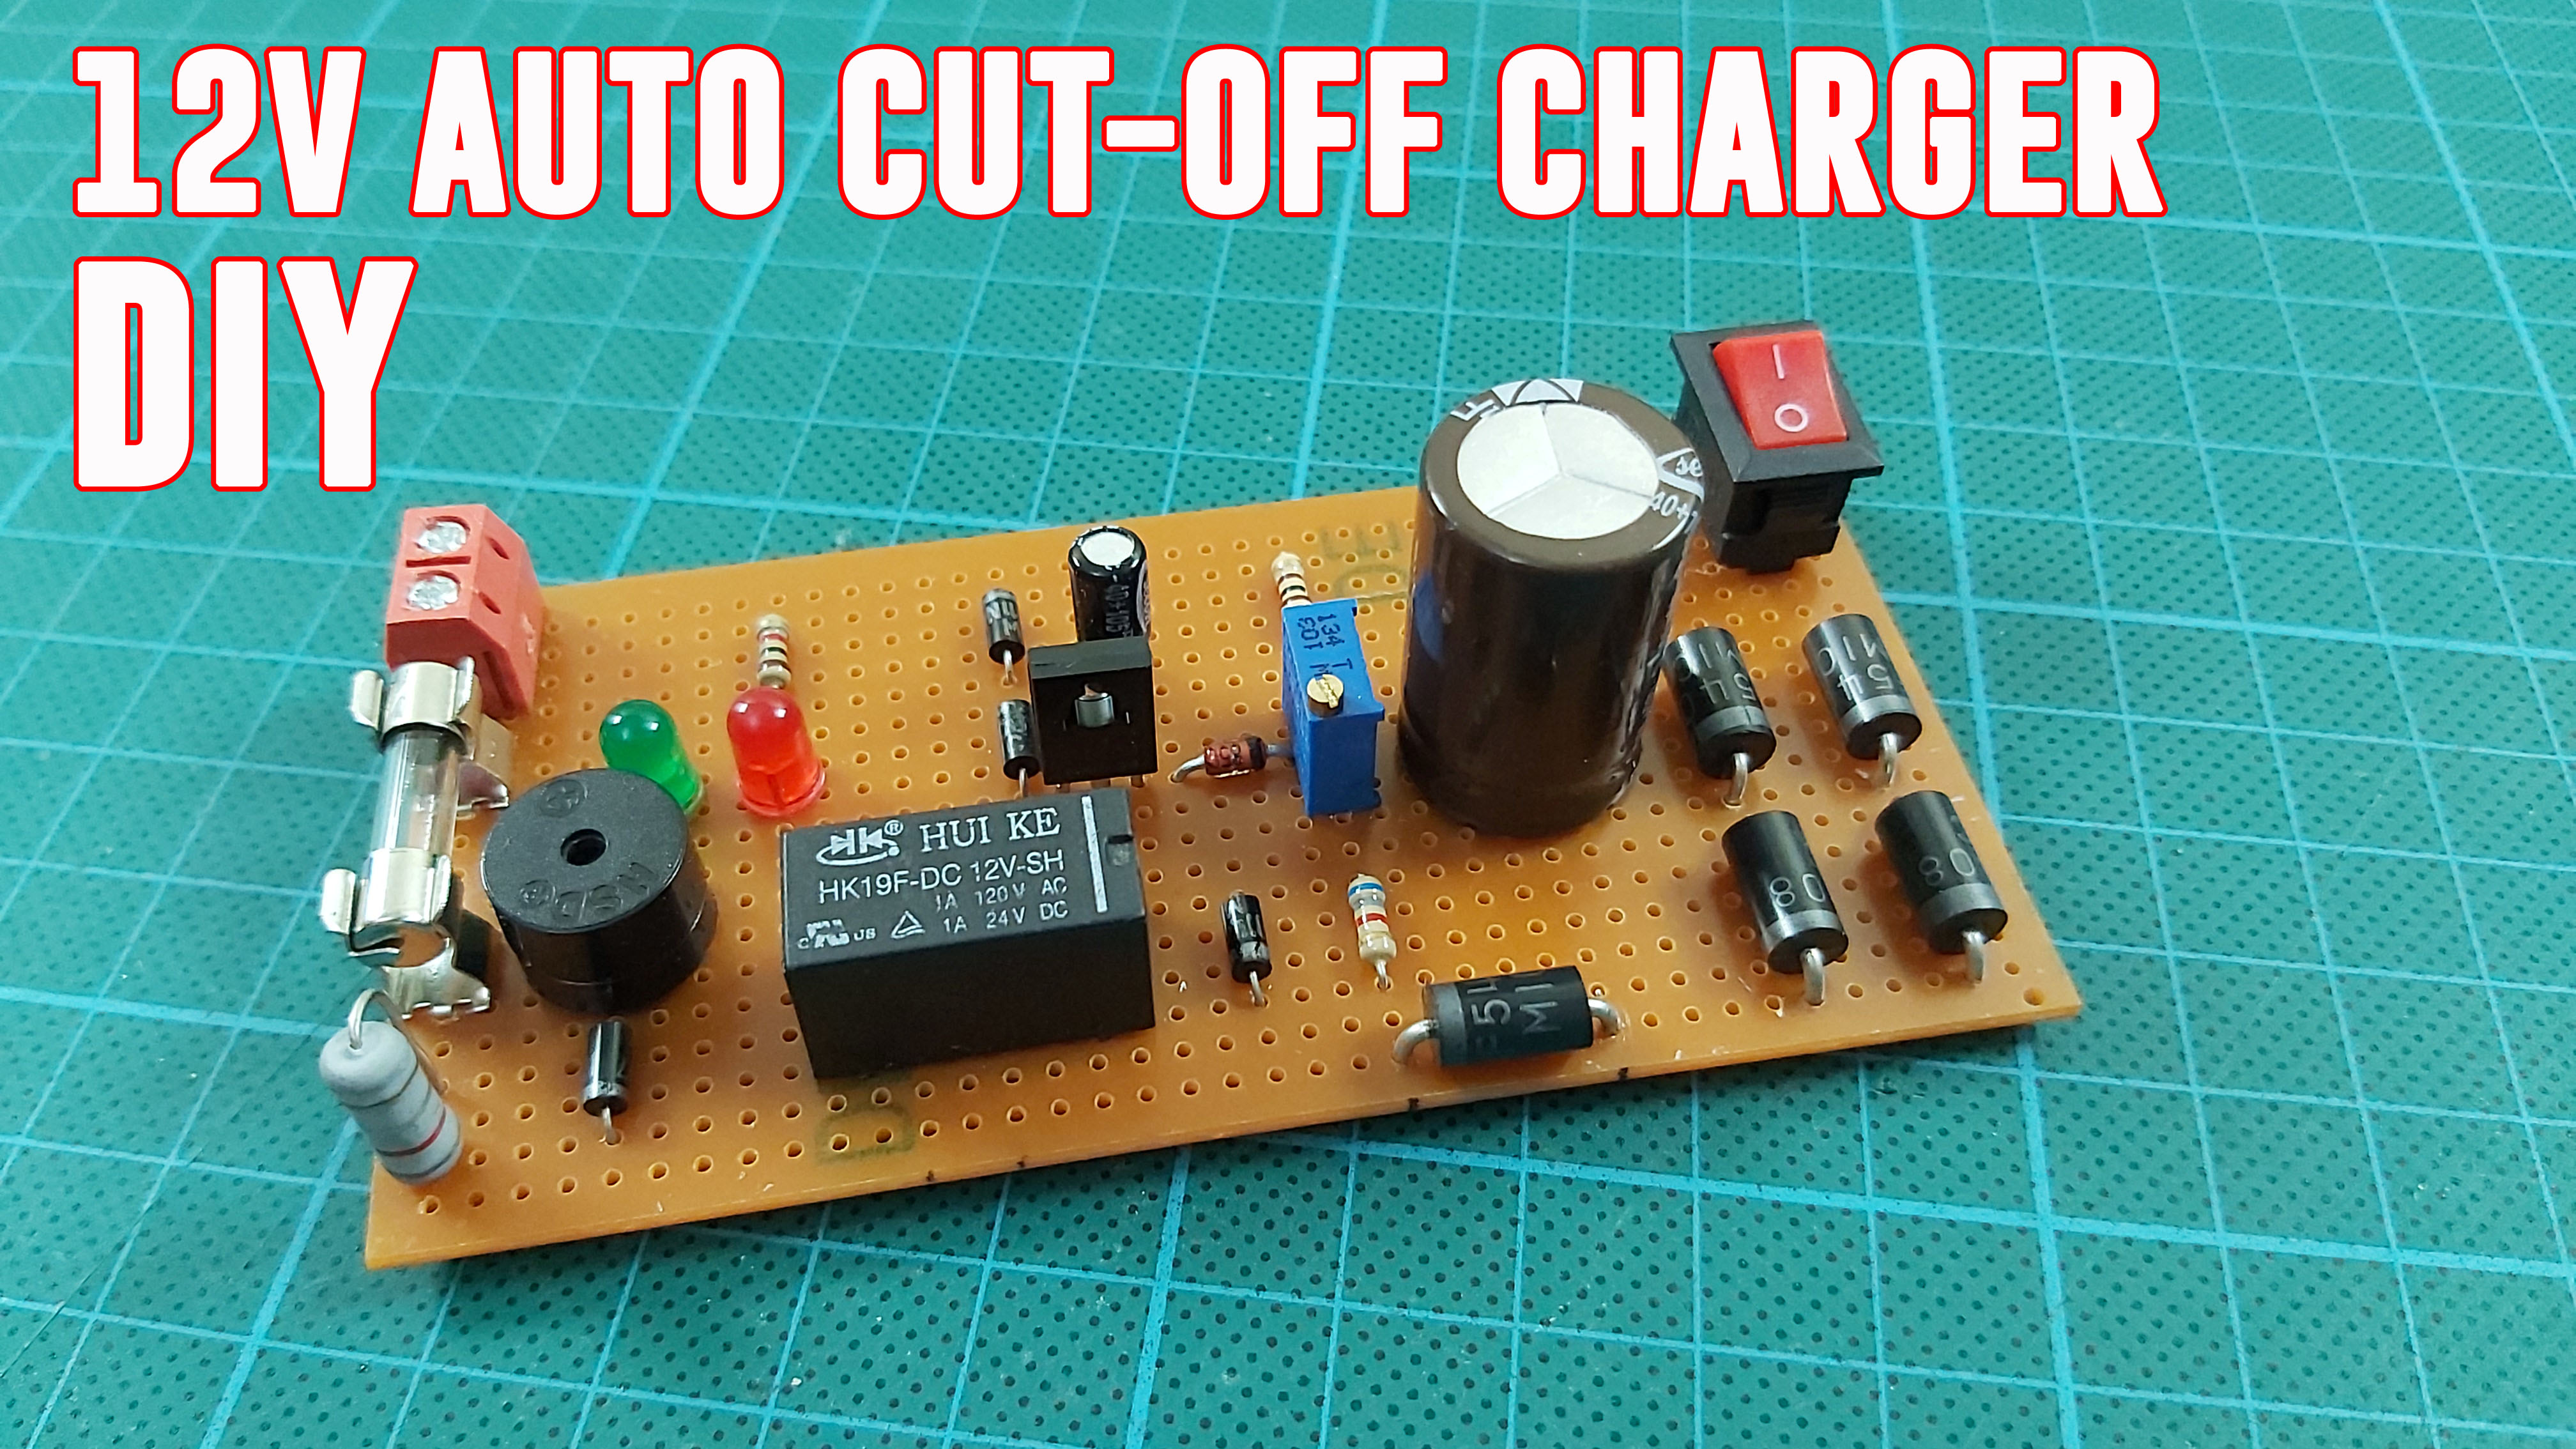 12V Lead Acid Battery Charging Circuit with Auto Cut-Off. DIY PB Battery Charger